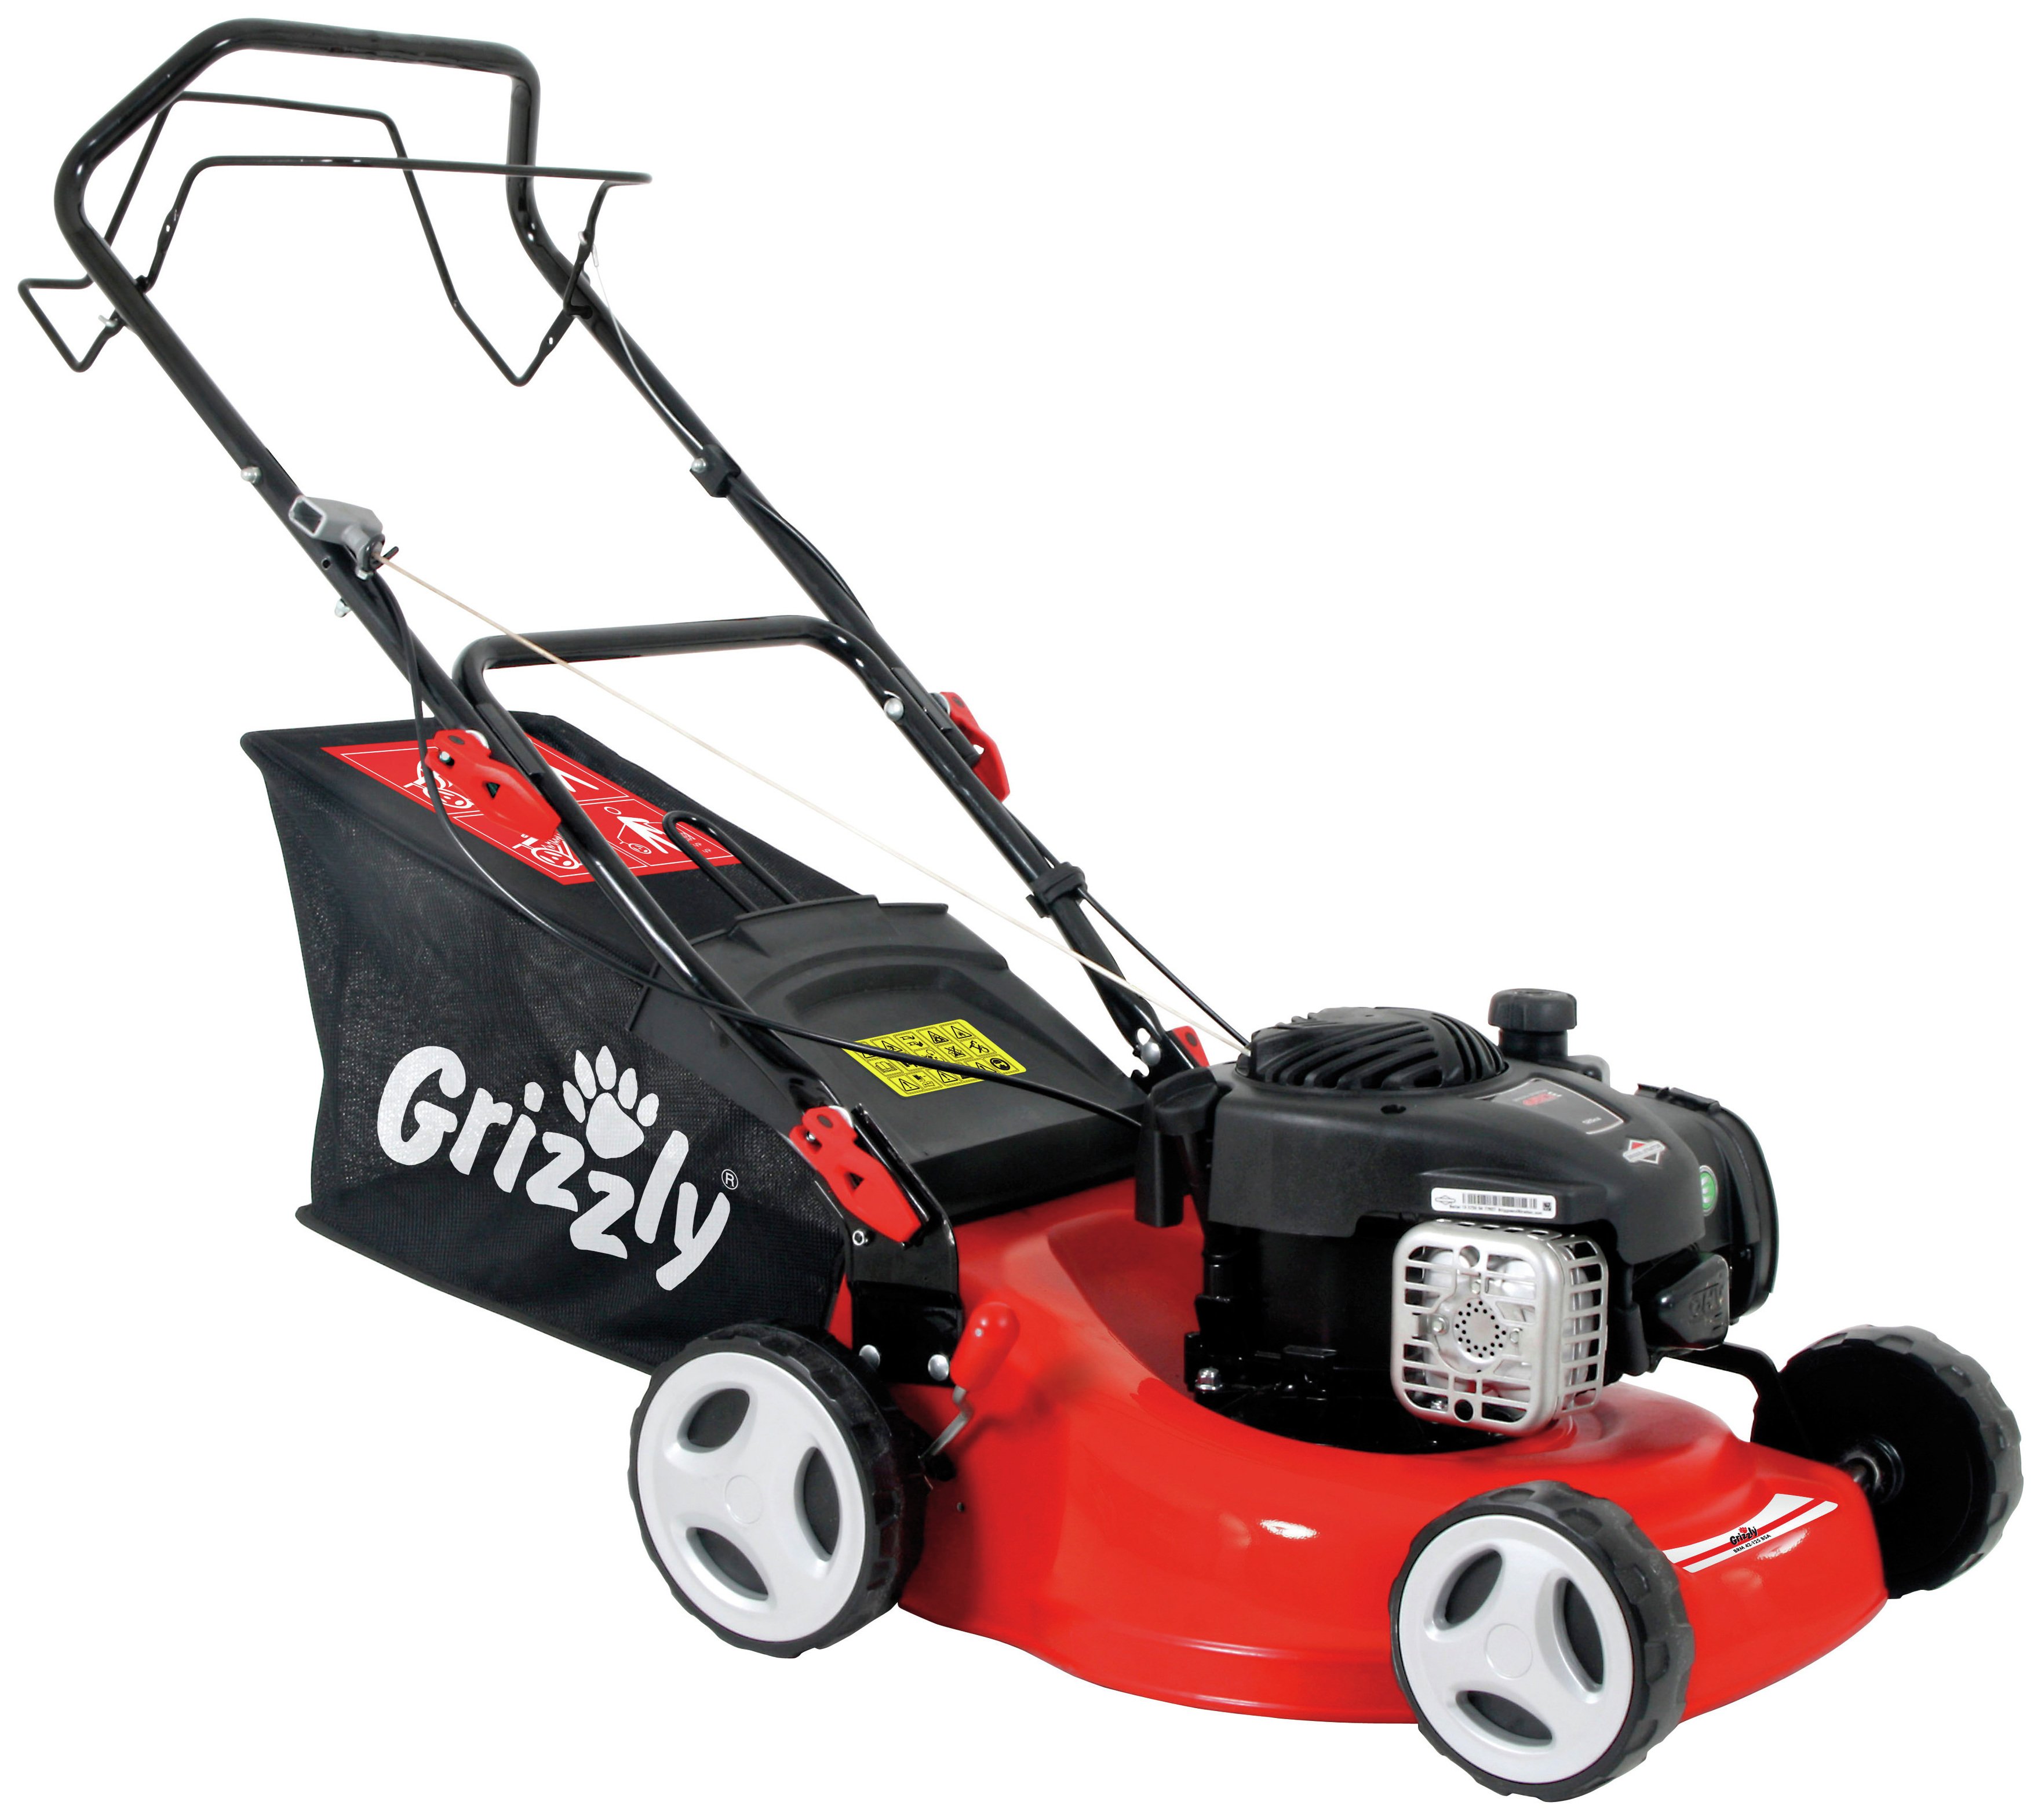 Grizzly Tools 42cm Self Propelled Petrol Lawnmower - 125cc